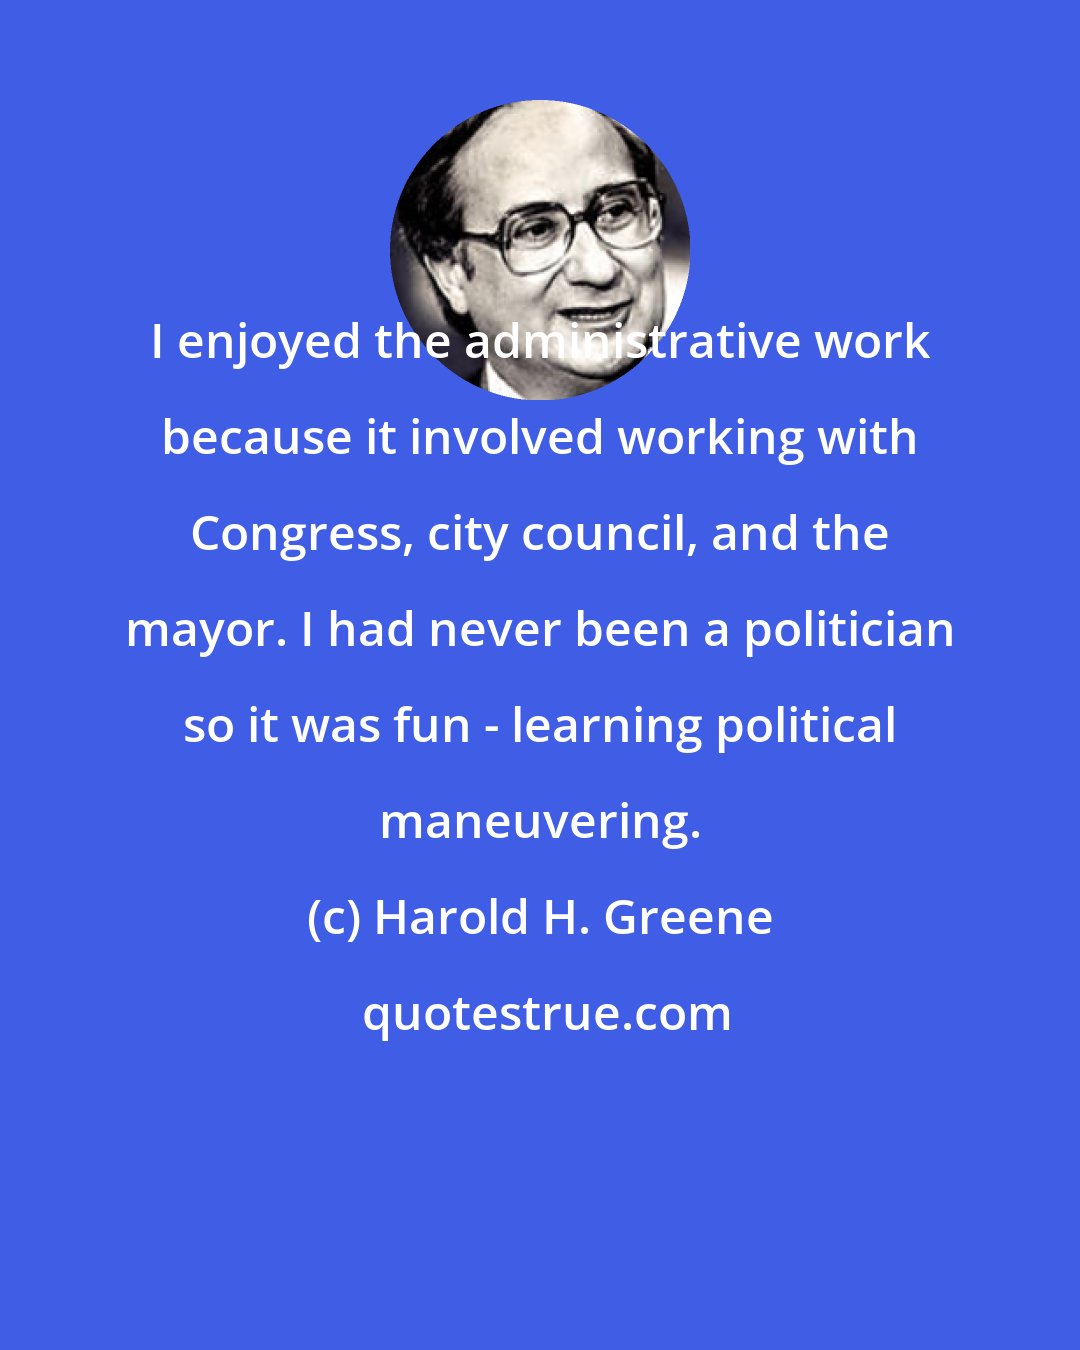 Harold H. Greene: I enjoyed the administrative work because it involved working with Congress, city council, and the mayor. I had never been a politician so it was fun - learning political maneuvering.